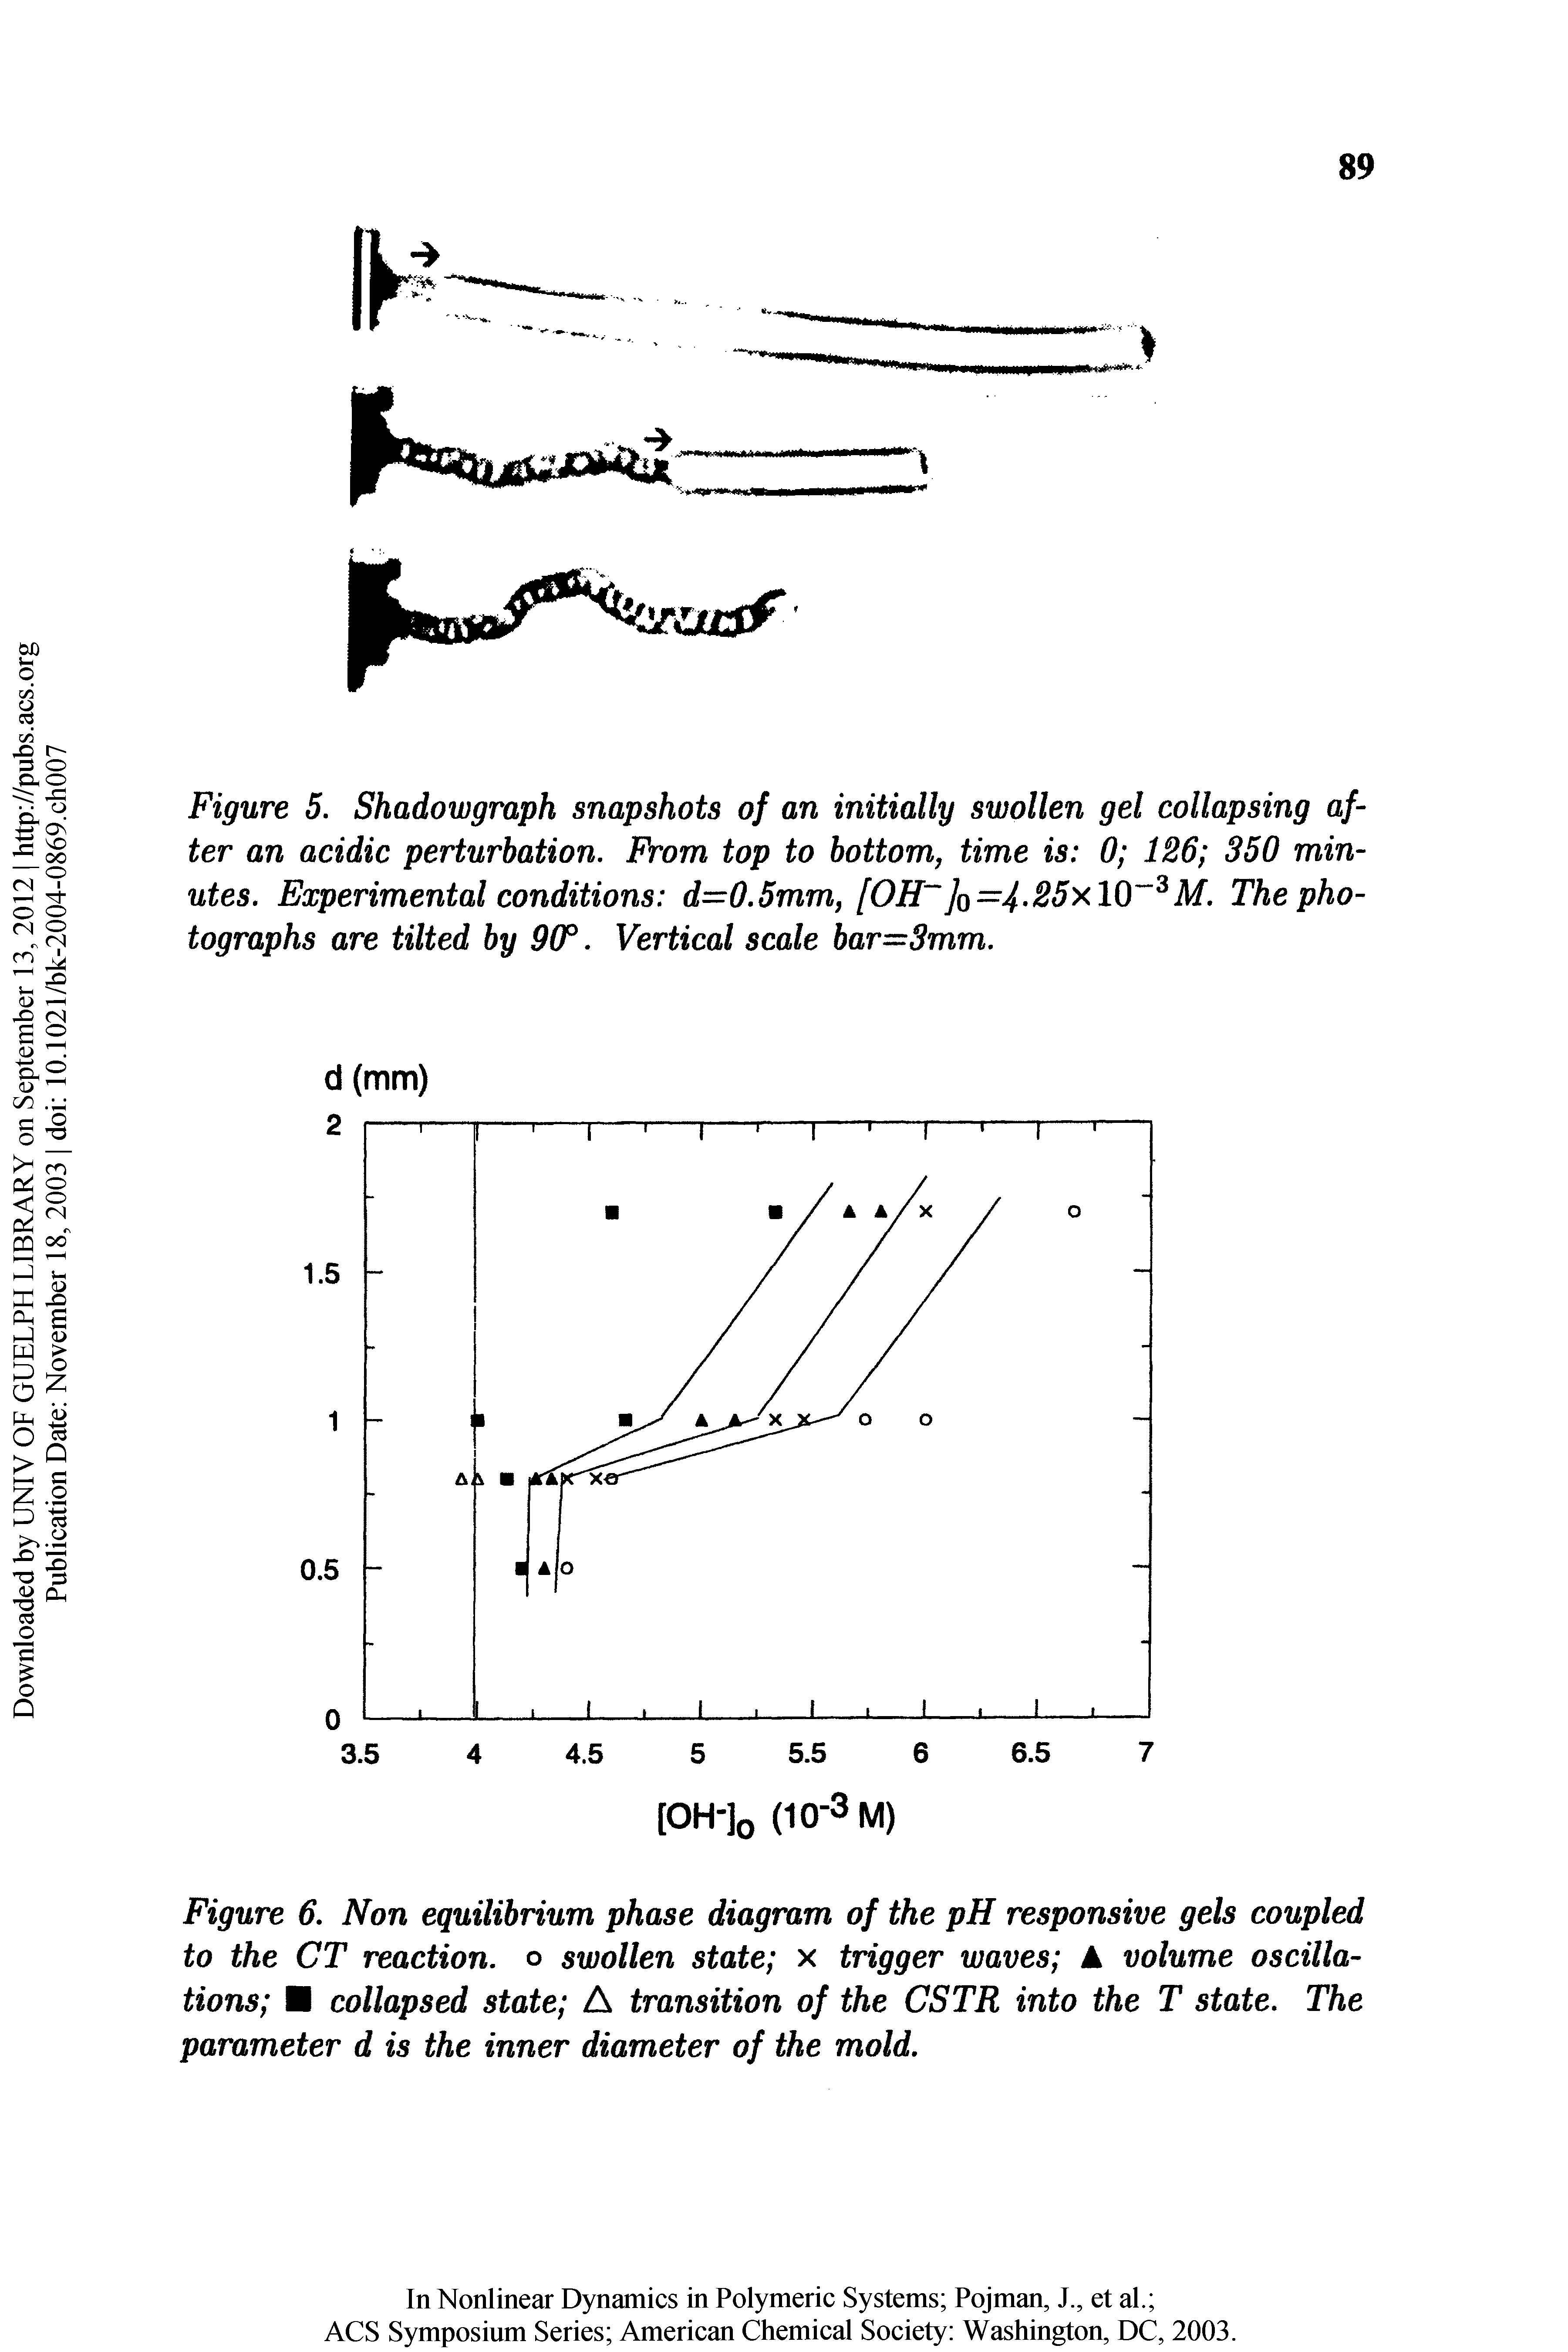 Figure 6, Non equilibrium phase diagram of the pH responsive gels coupled to the CT reaction, o swollen state x trigger waves A volume oscillations collapsed state A transition of the CSTR into the T state. The parameter d is the inner diameter of the mold.